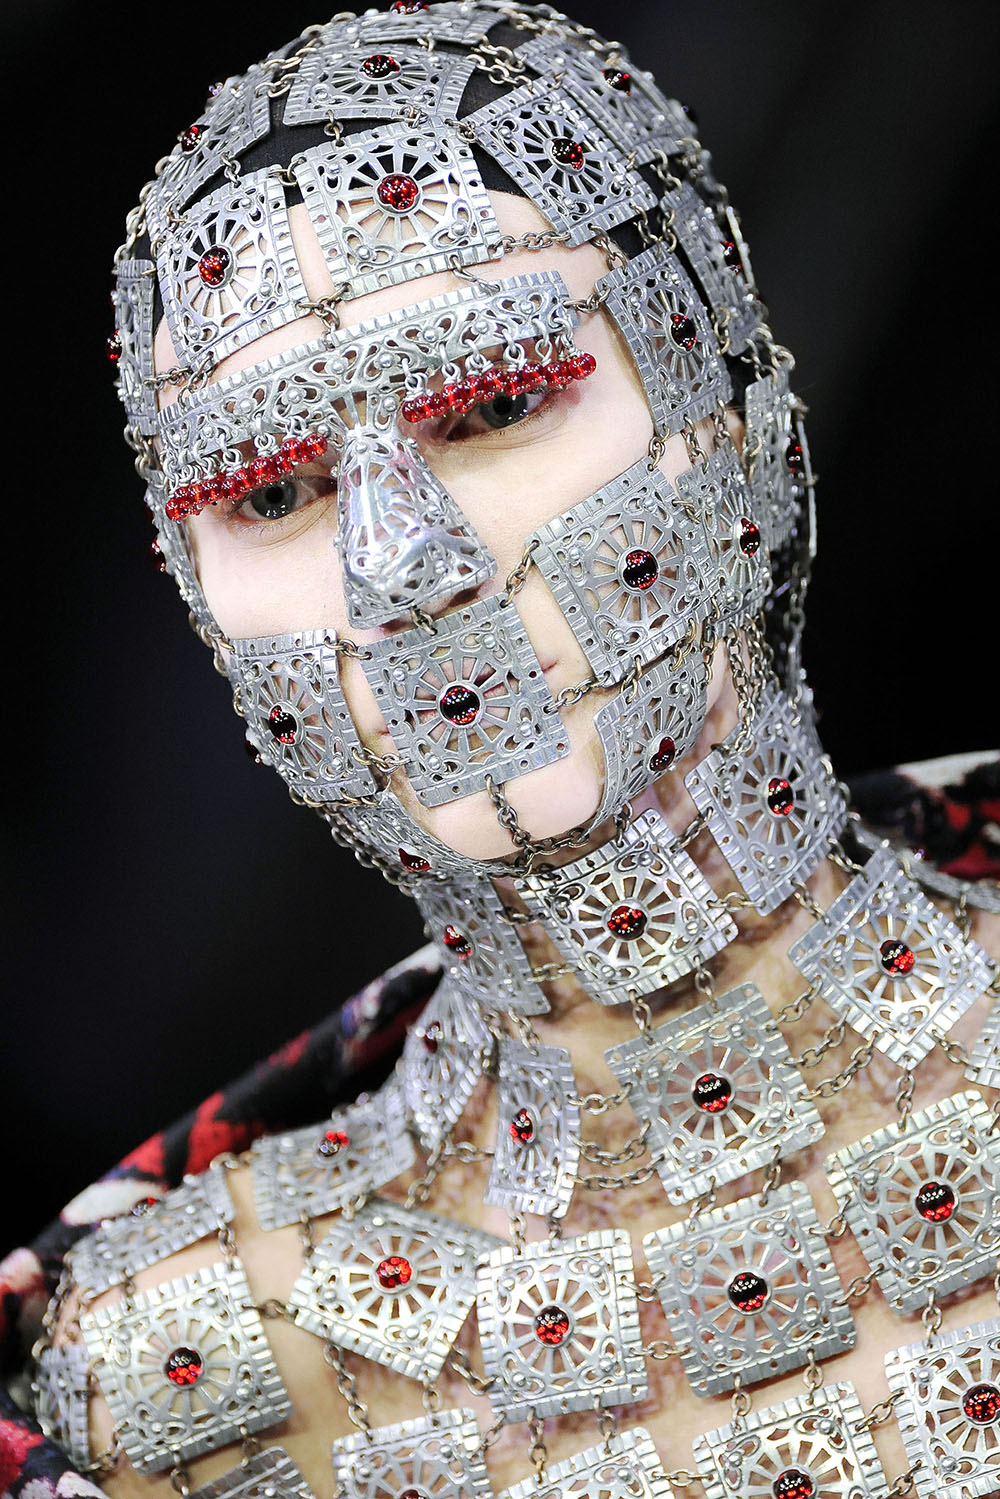 An Uncompromising Talent: Unravelling the Work of Alexander McQueen